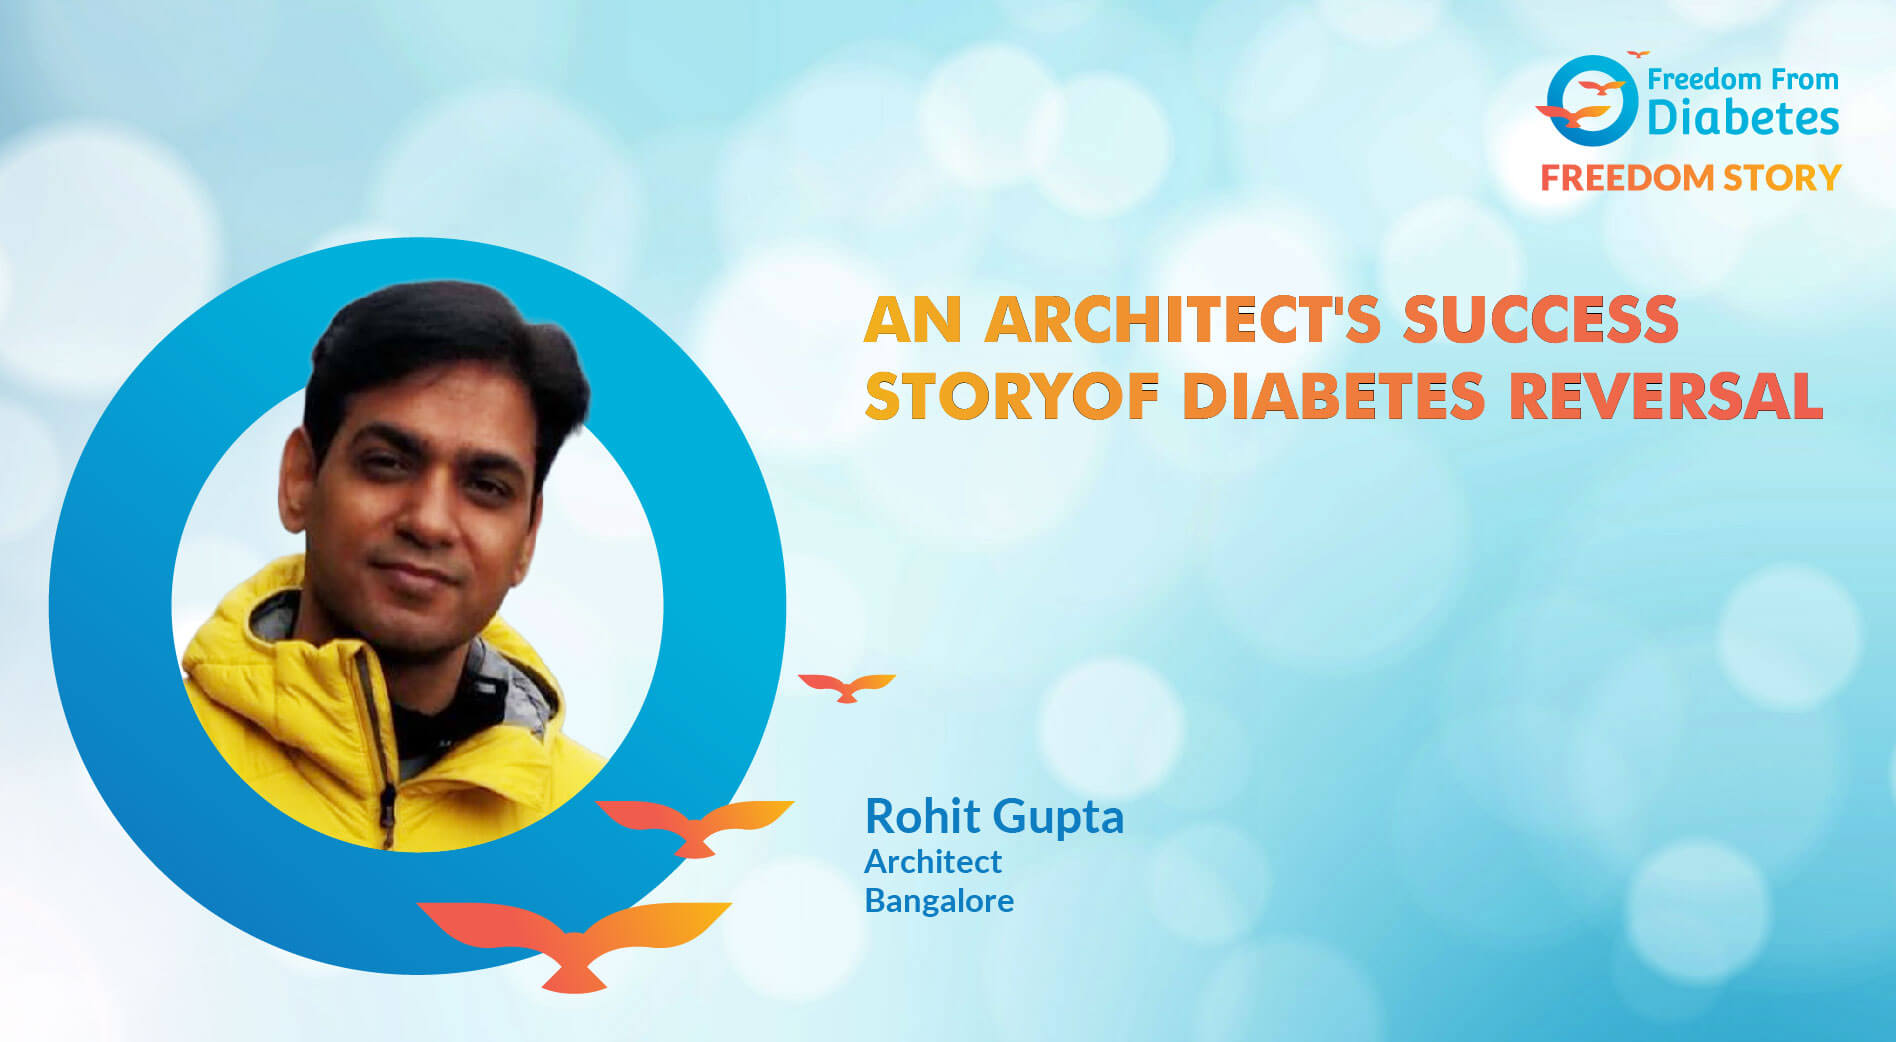 An Architect's success story of diabetes reversal